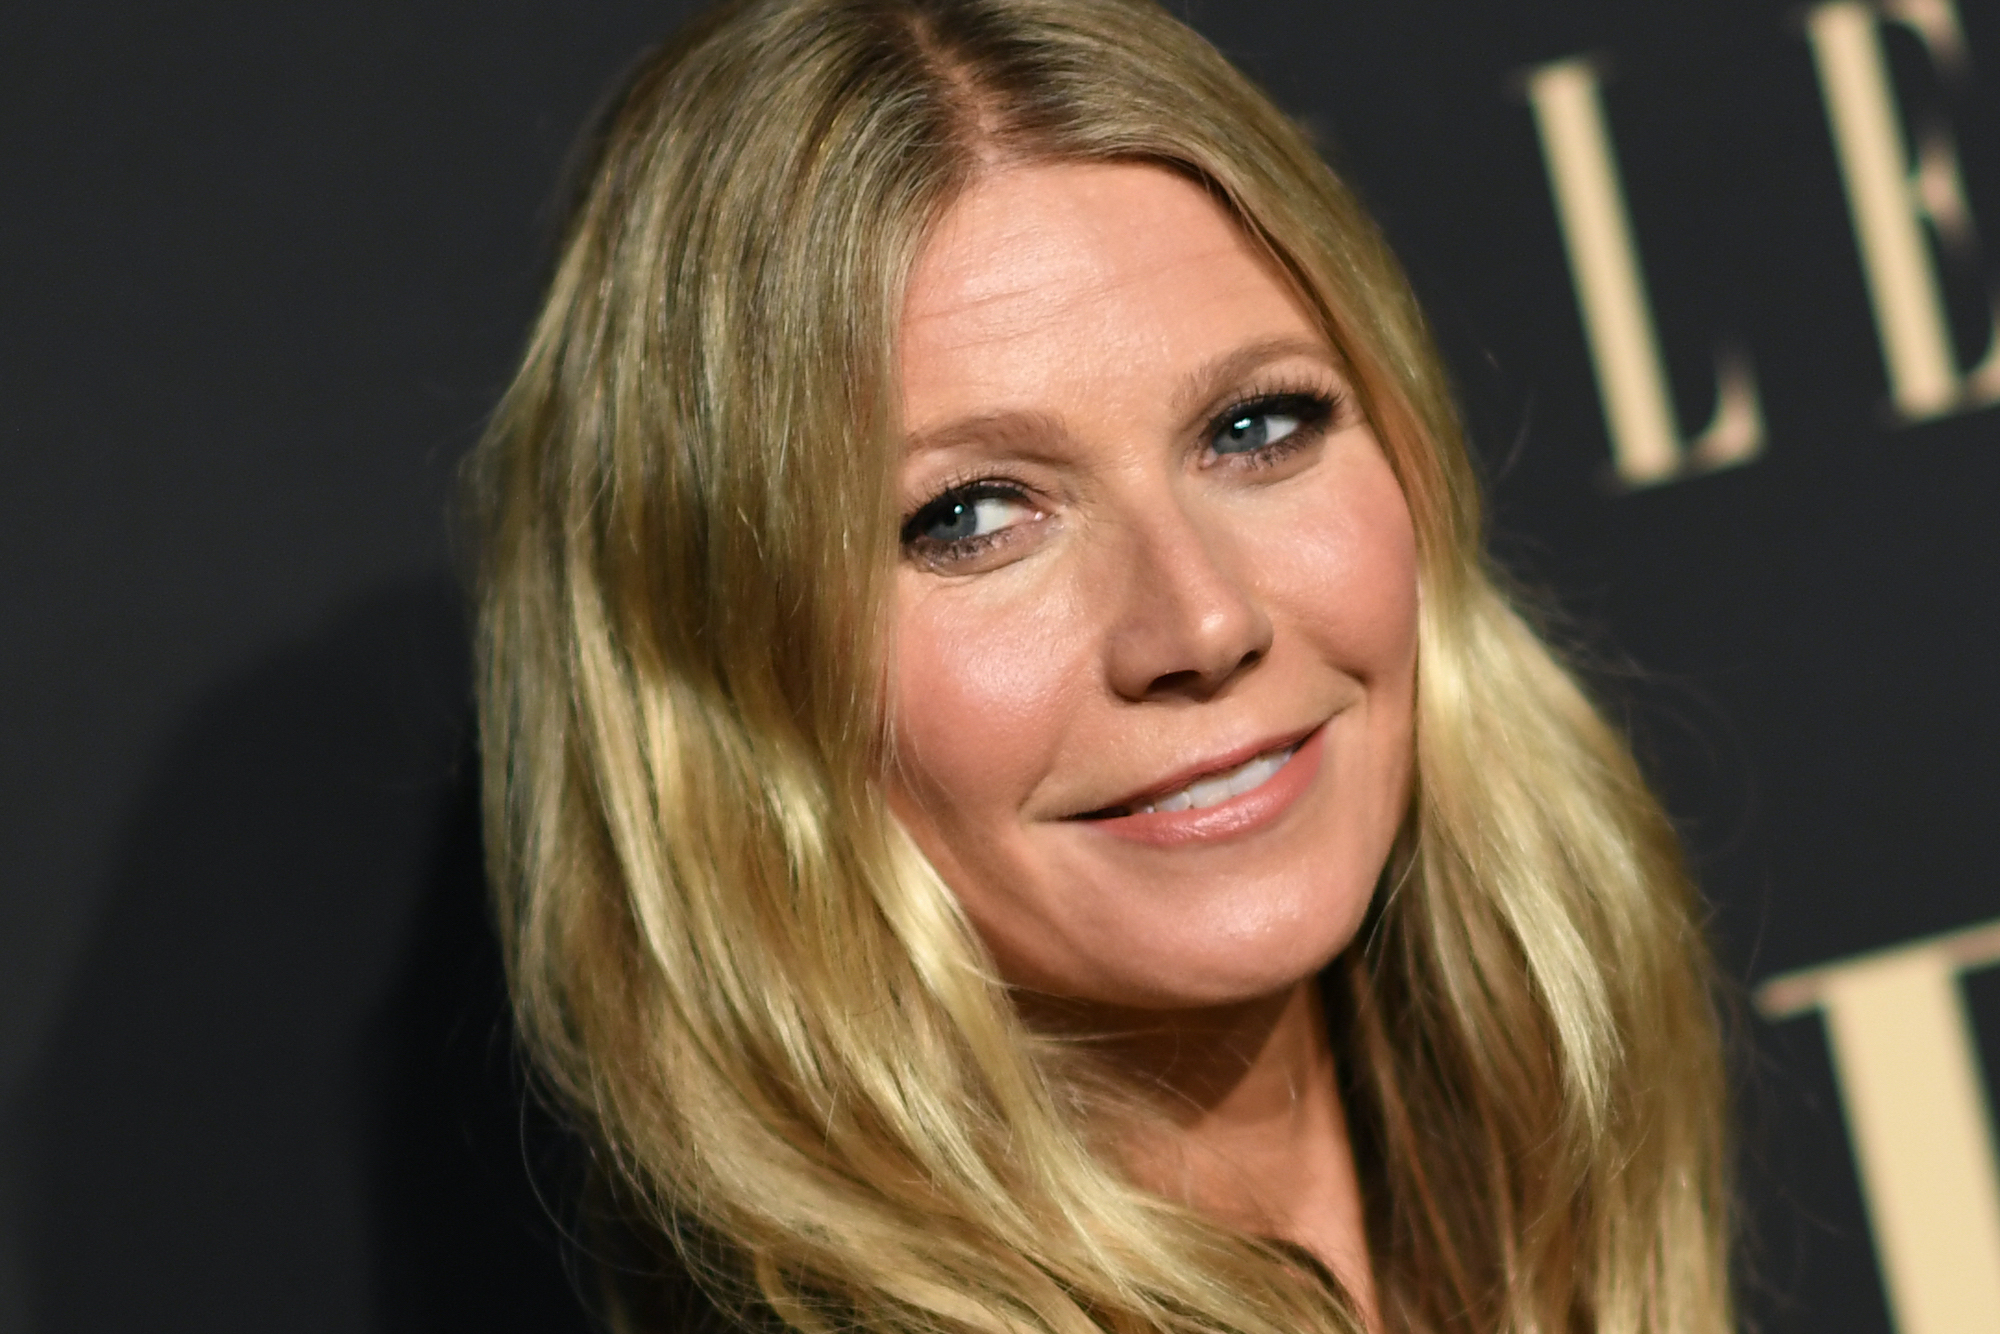 Paltrow Has Showed Off Her Singing Talents in More than 1 Movie